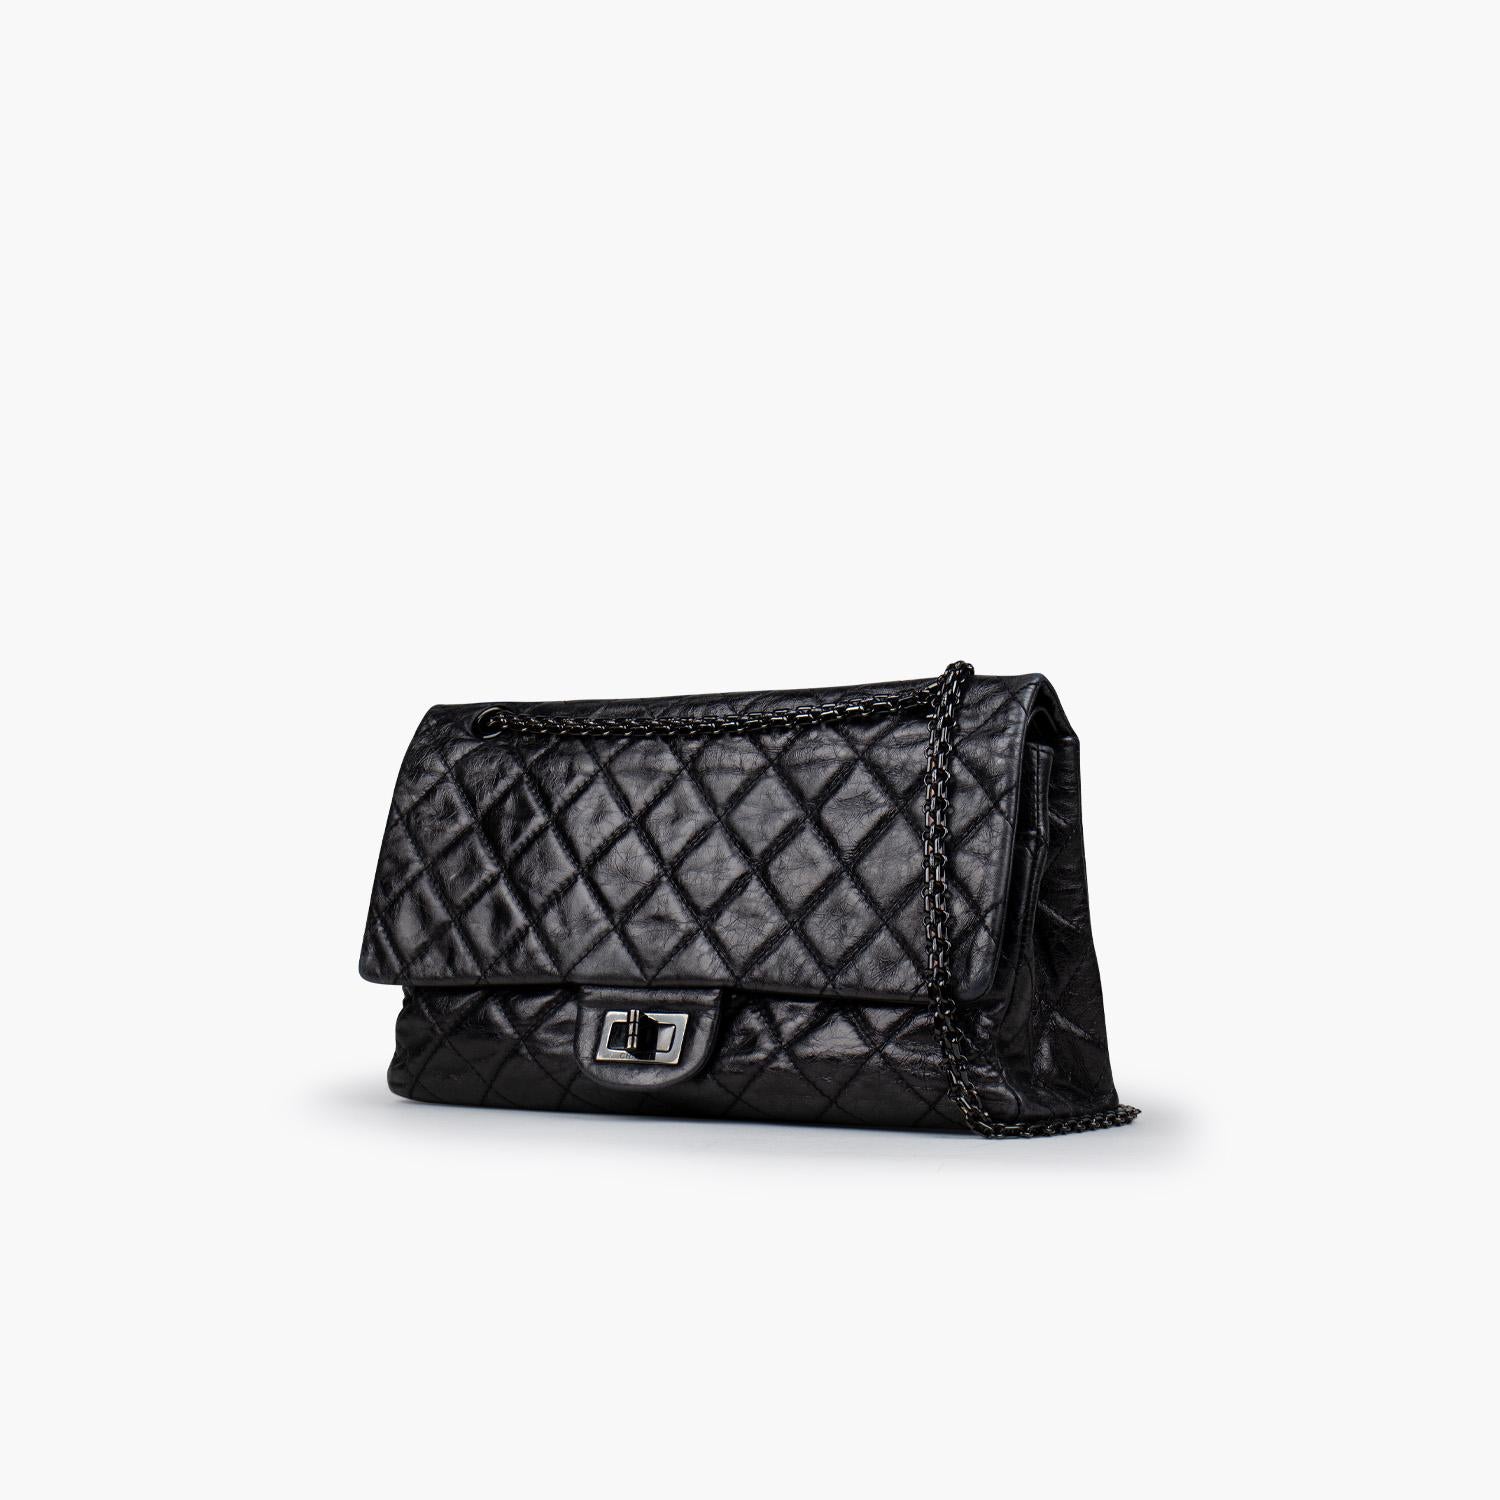 Black metallic Chanel Reissue 227 Double Flap Bag

- Black-tone hardware
- Convertible Venetian chain-link shoulder strap
- Single exterior patch pocket at back
- Single zip pocket at flap underside, three interior compartments; two with snap